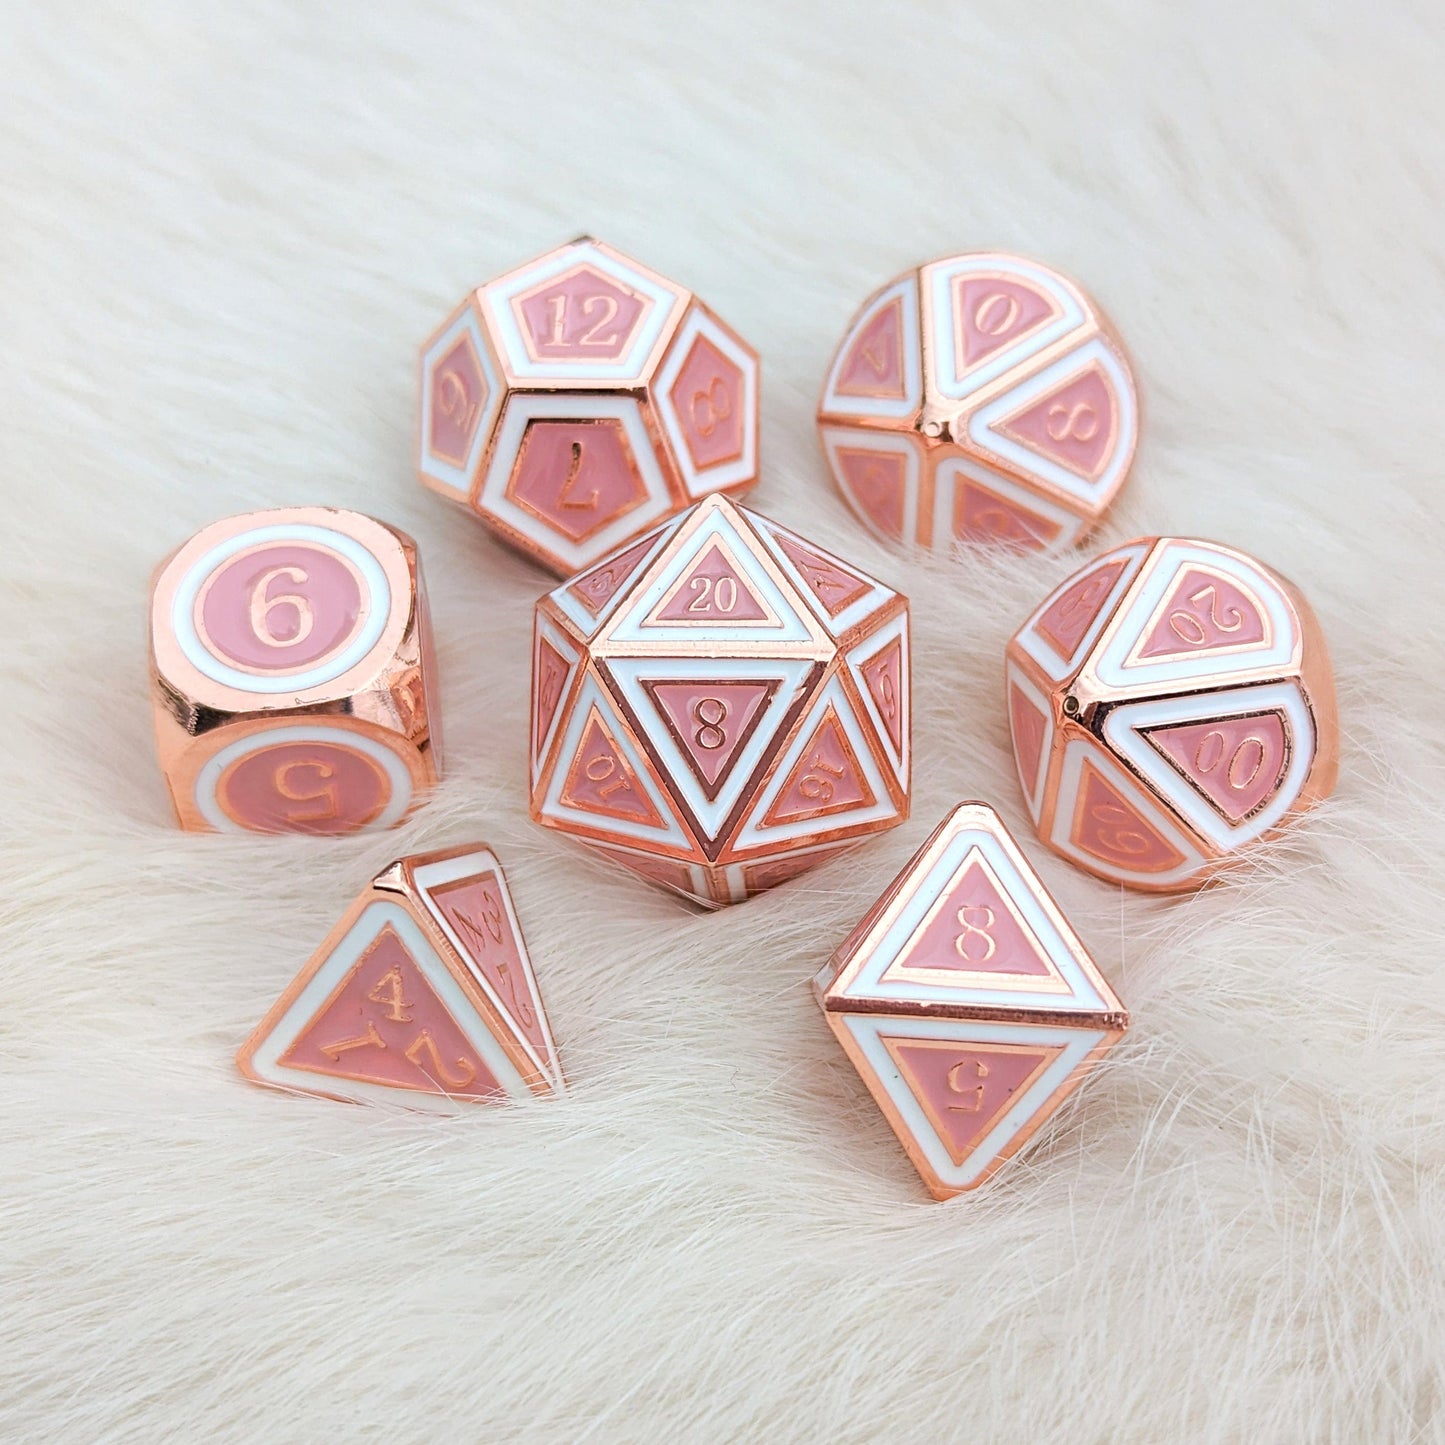 Ostara Metal Dice Set. Copper Plated Pink and White